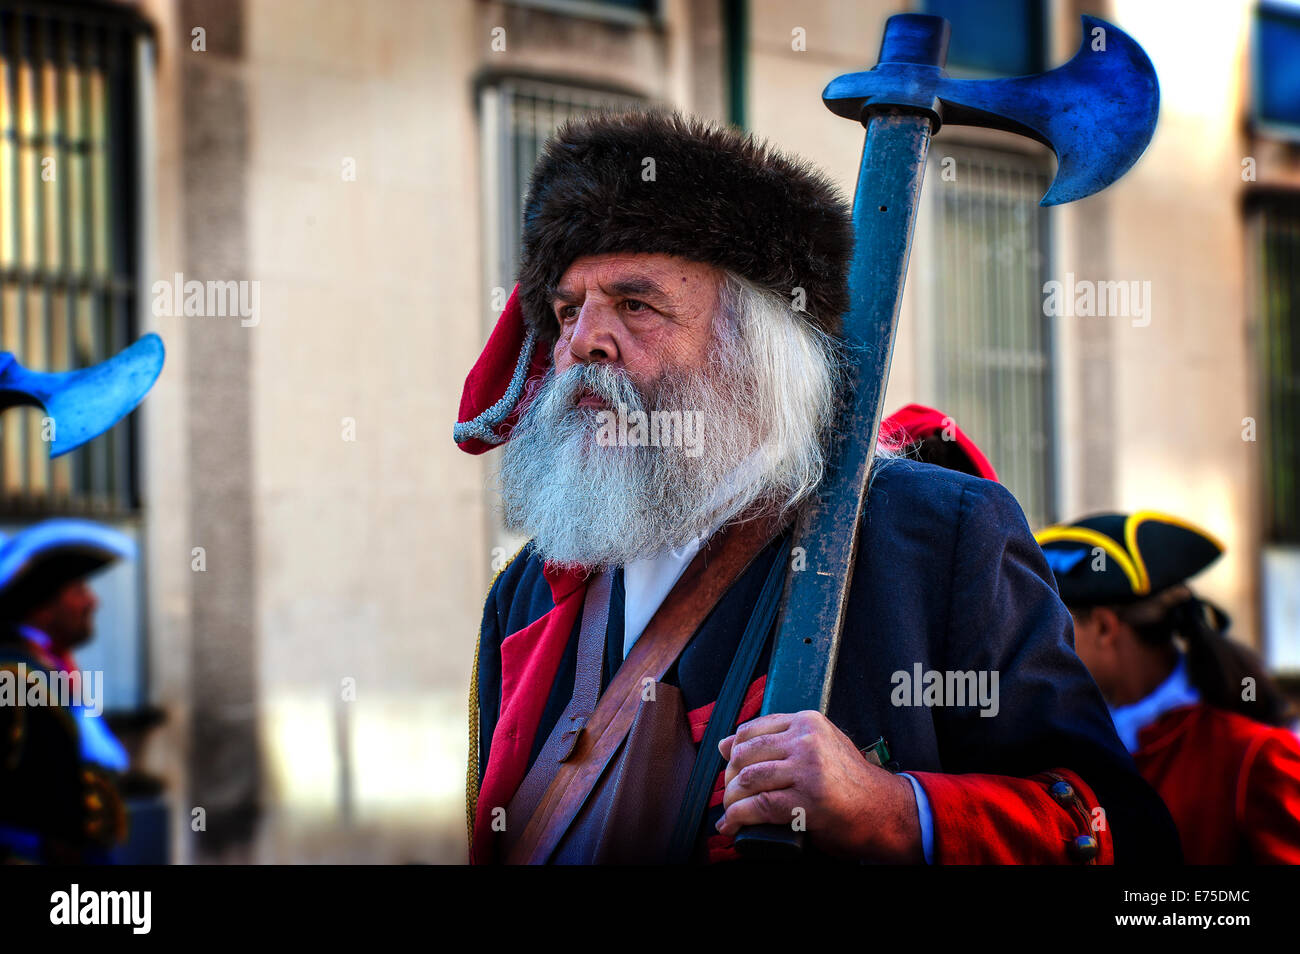 Italy Piedmont Turin 06th September 2014 reenactment of the siege of Turin in 1706 -The parade Stock Photo